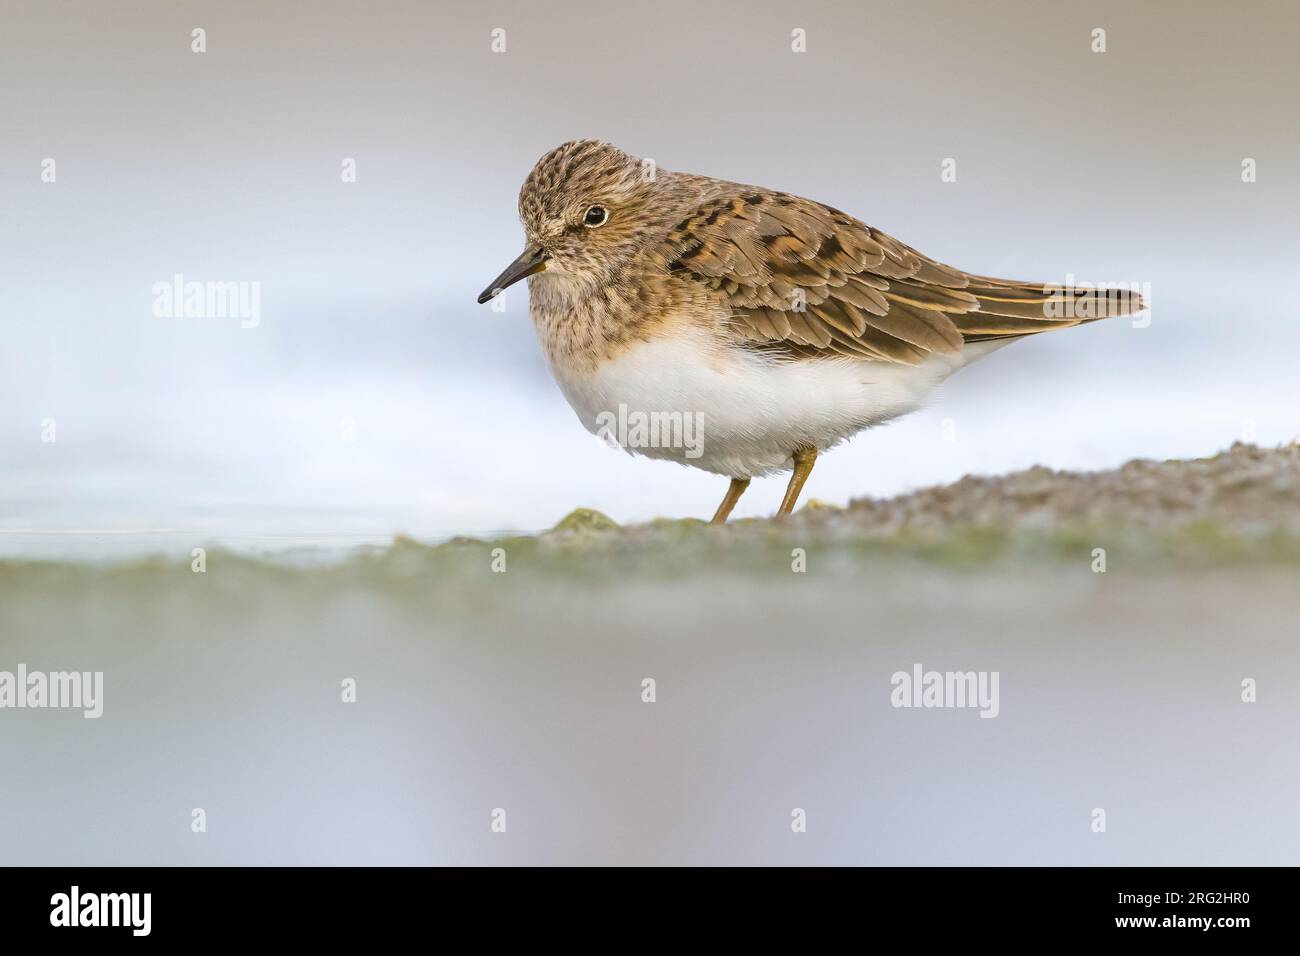 Temminck's Stint, Calidris temminckii, standing in shallow water in Italy. Stock Photo